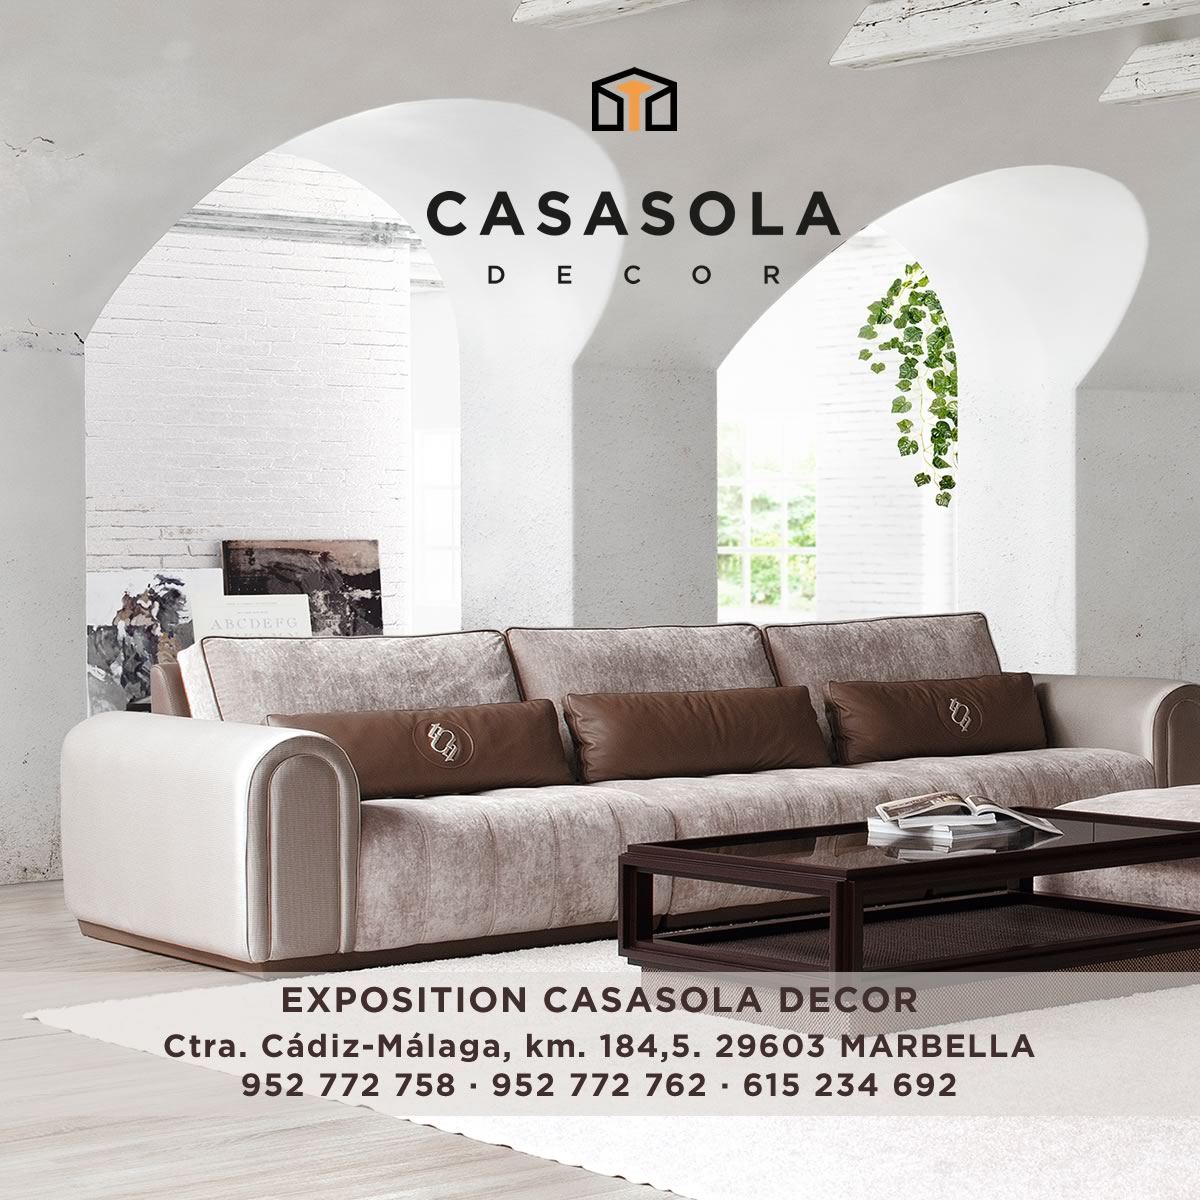 We will be delighted to attend you in our #showroom every day! ✅ SHOWROOM CASASOLA DECOR ✅ Mon-Fri: 9h00 - 19h00 & Satur:10h00 - 14h00 #marbellastyle #salon #bedroom #myhome  #homedecor   #furniture #style #modernhome #muebles #interiordetails #homestyle  #luxe  #room #homeluxe